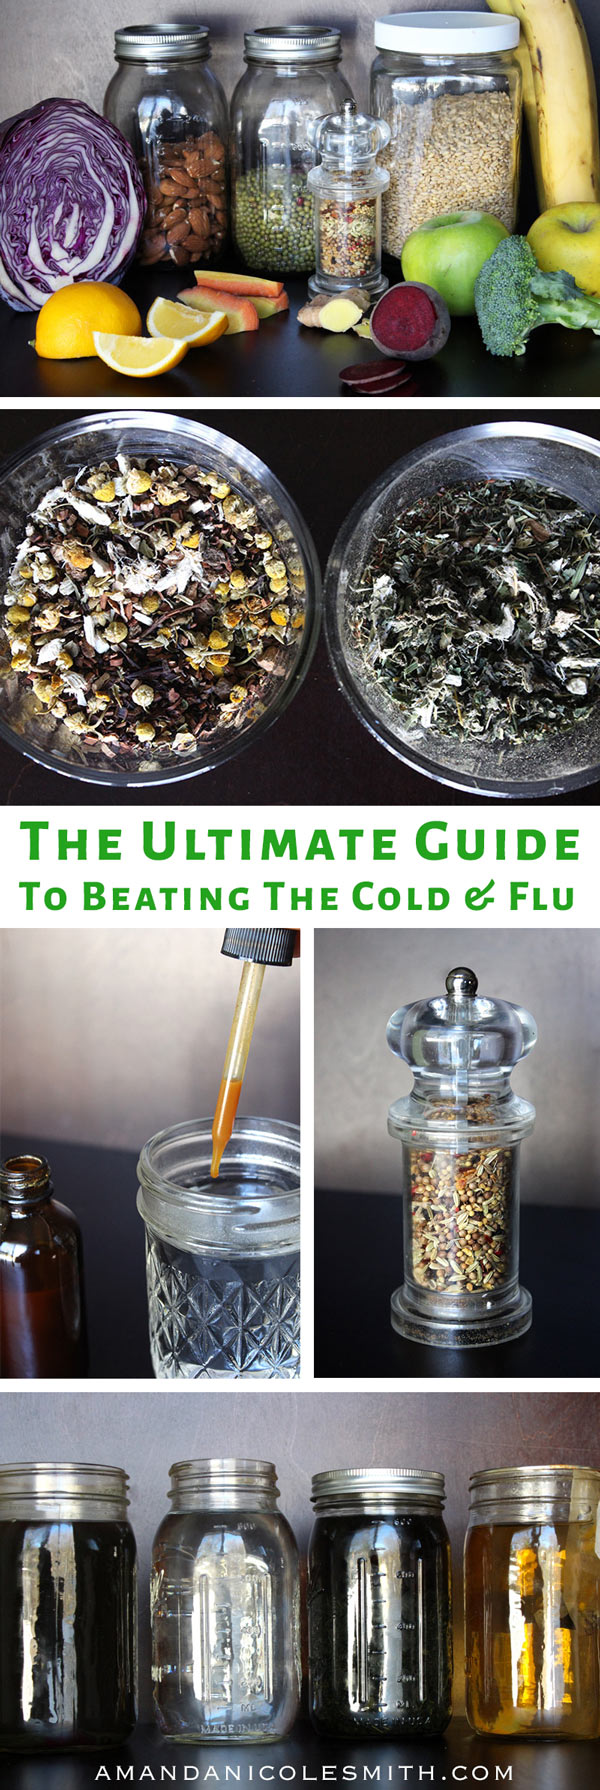 The Ultimate Guide To Beating The Cold & Flu